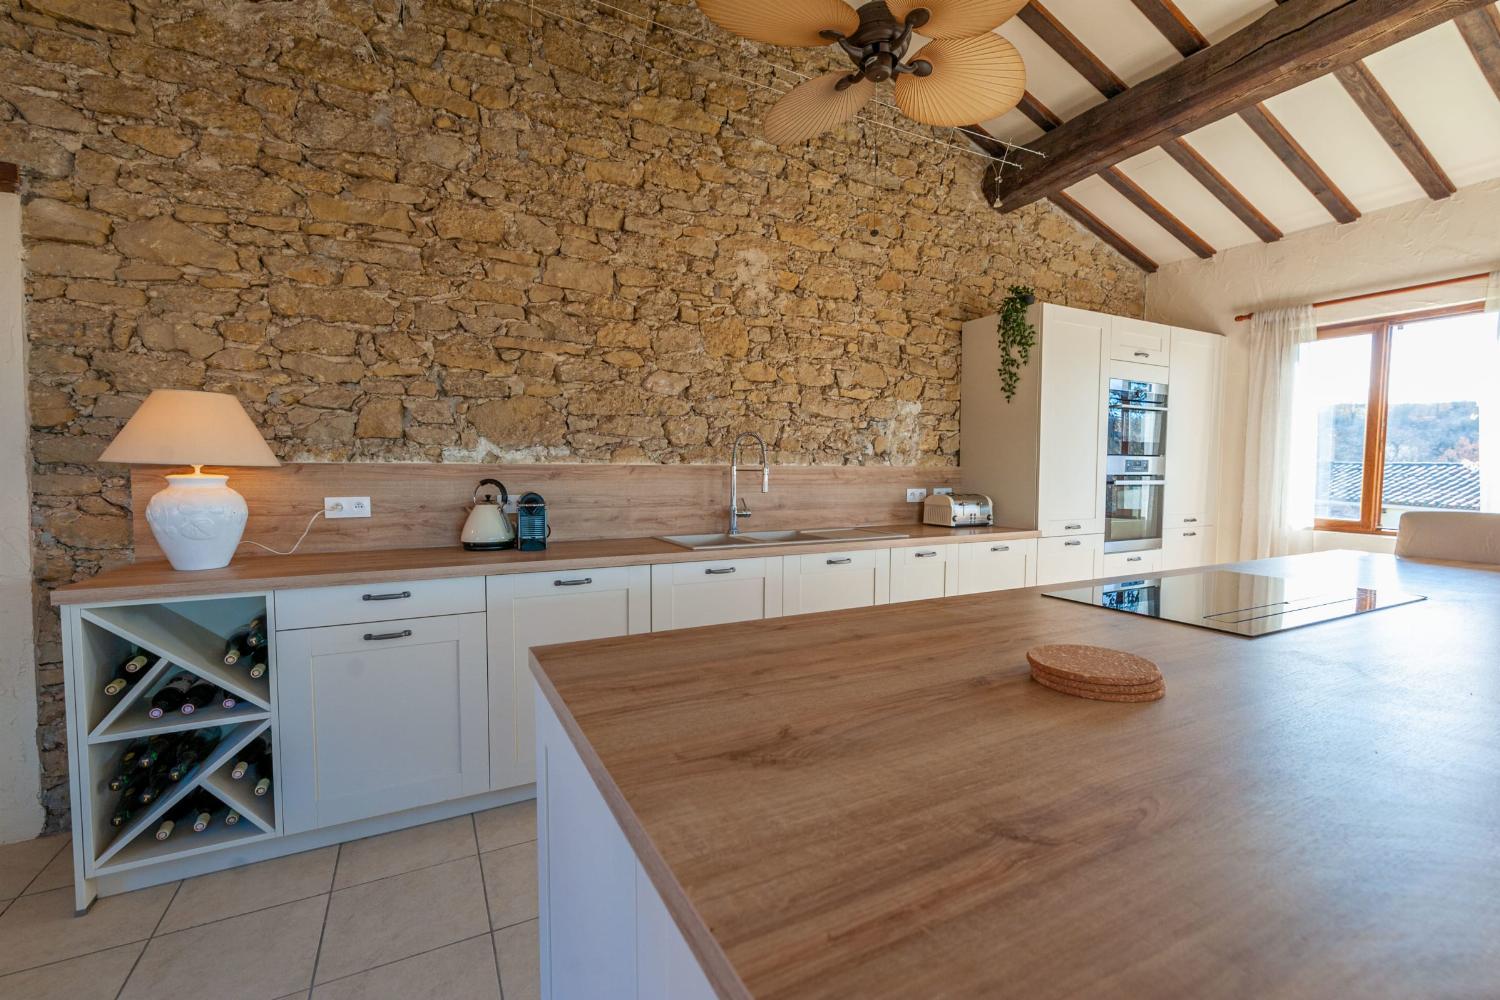 Kitchen | Rental home in South of France